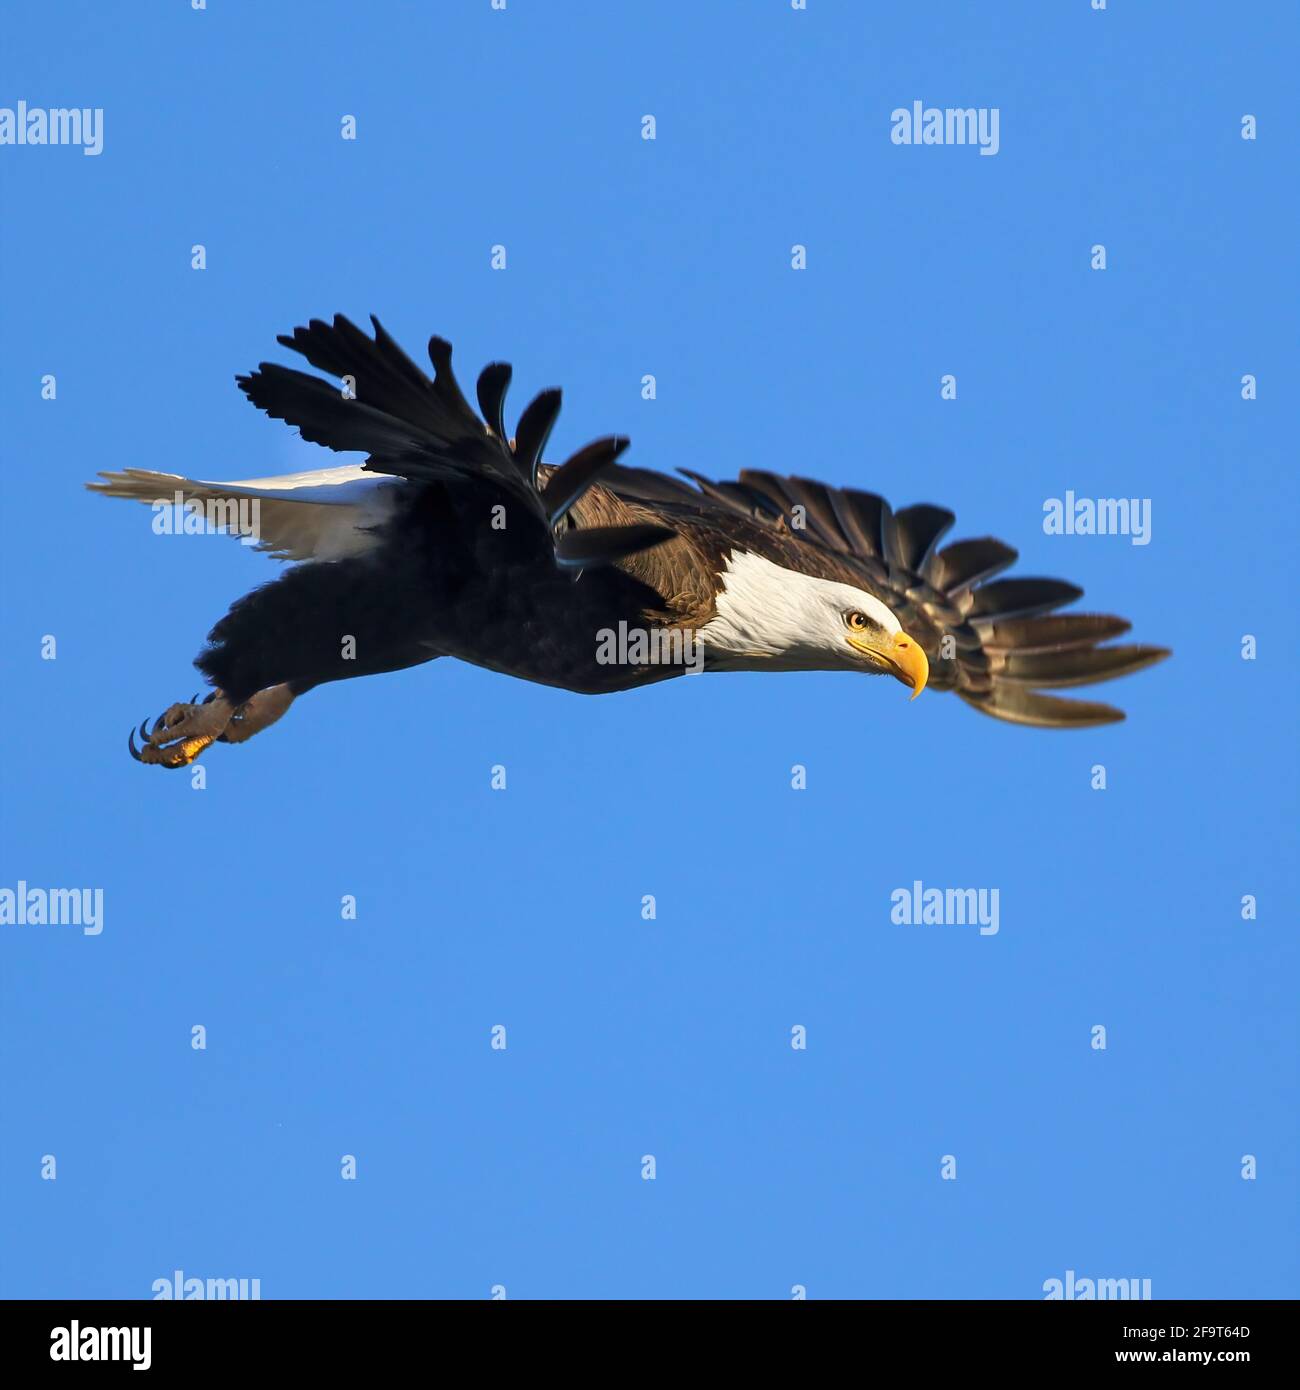 A Bald Eagle with outstretched wings, commencing to fly with the light of the afternoon sun shining brightly, and against a deep blue sky. Stock Photo